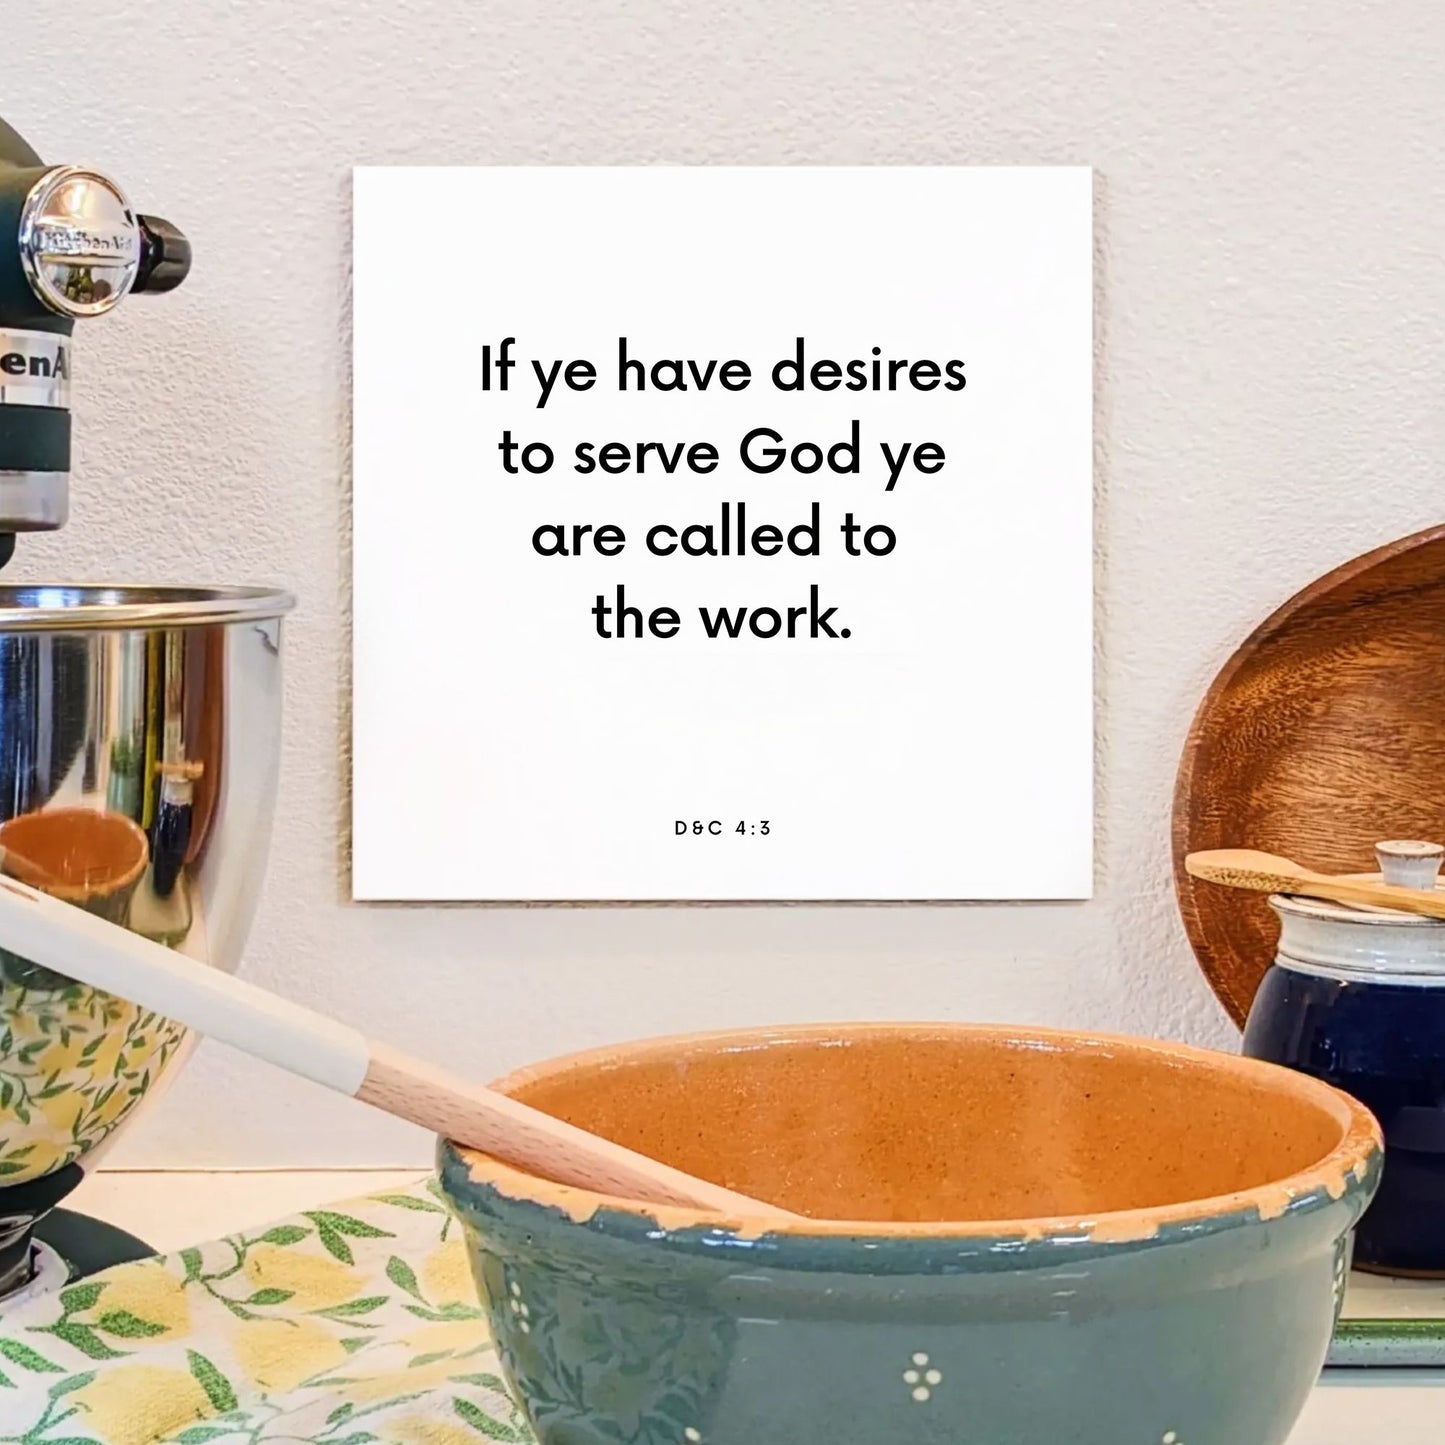 Kitchen mouting of the scripture tile for D&C 4:3 - "If ye have desires to serve God ye are called to the work"